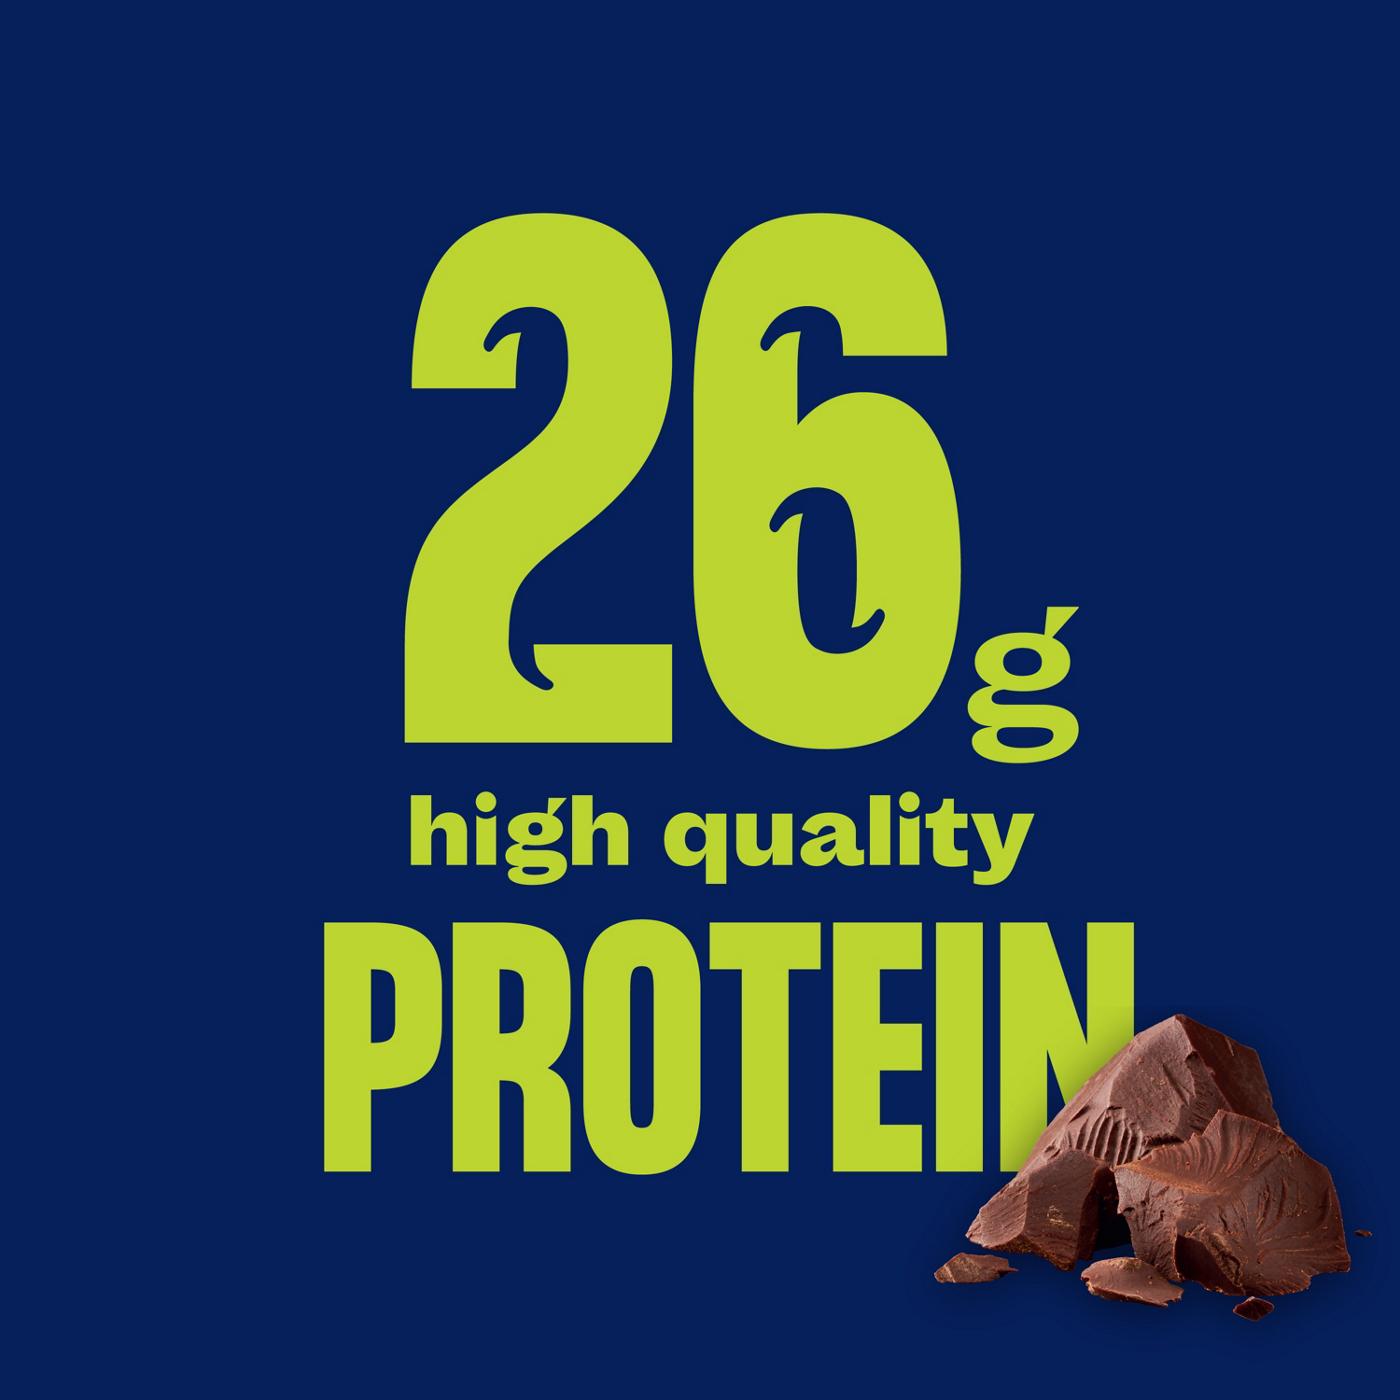 Core Power Complete 26g Protein Shakes - Chocolate, 12 Pk; image 2 of 5